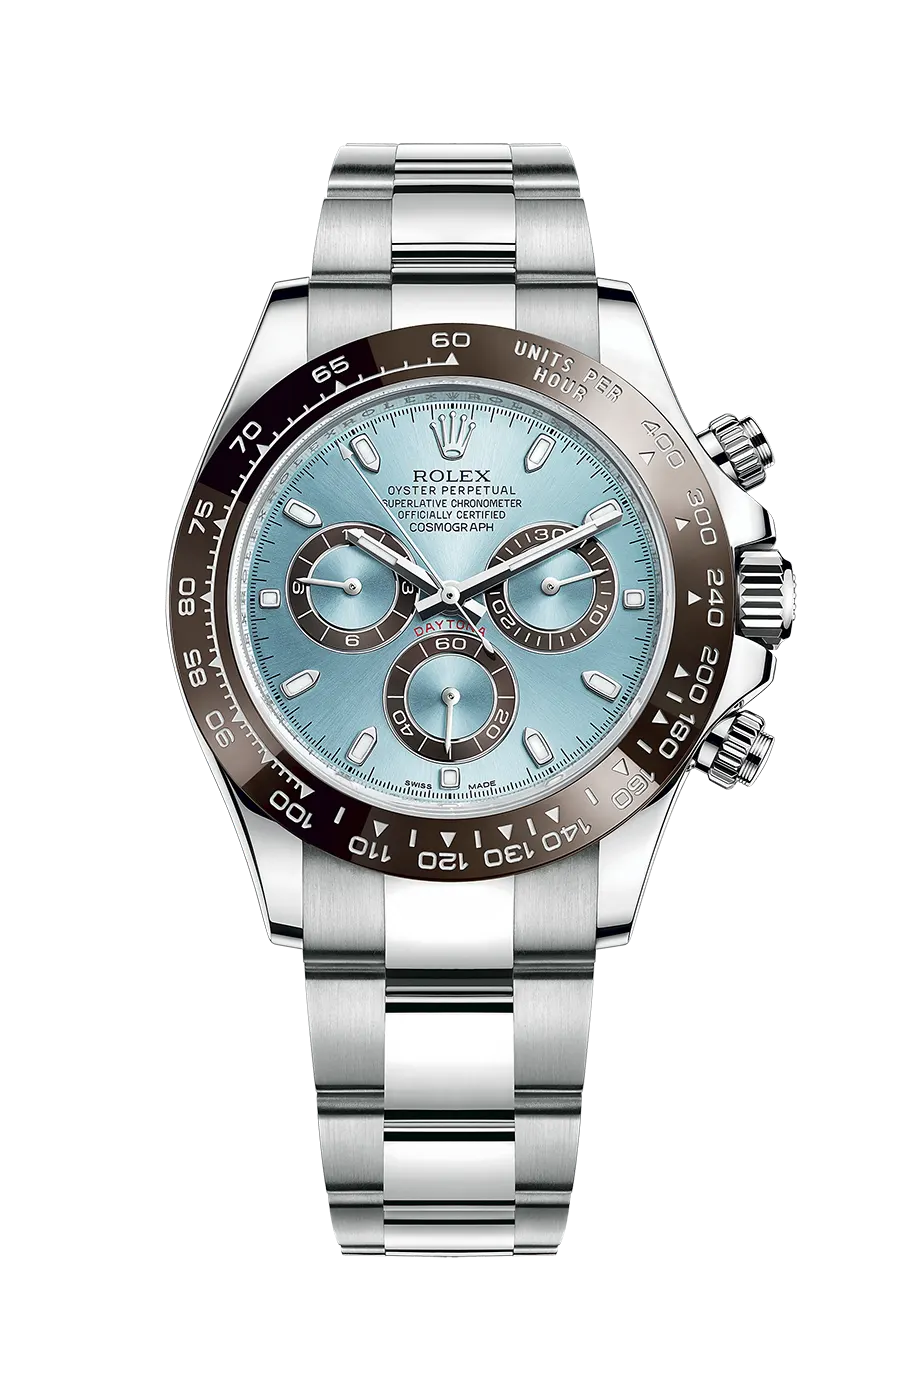 NEW Rolex Daytona Chronograph Platinum Ice Blue Dial Watch B/P '23' 116506  - Jewels in Time